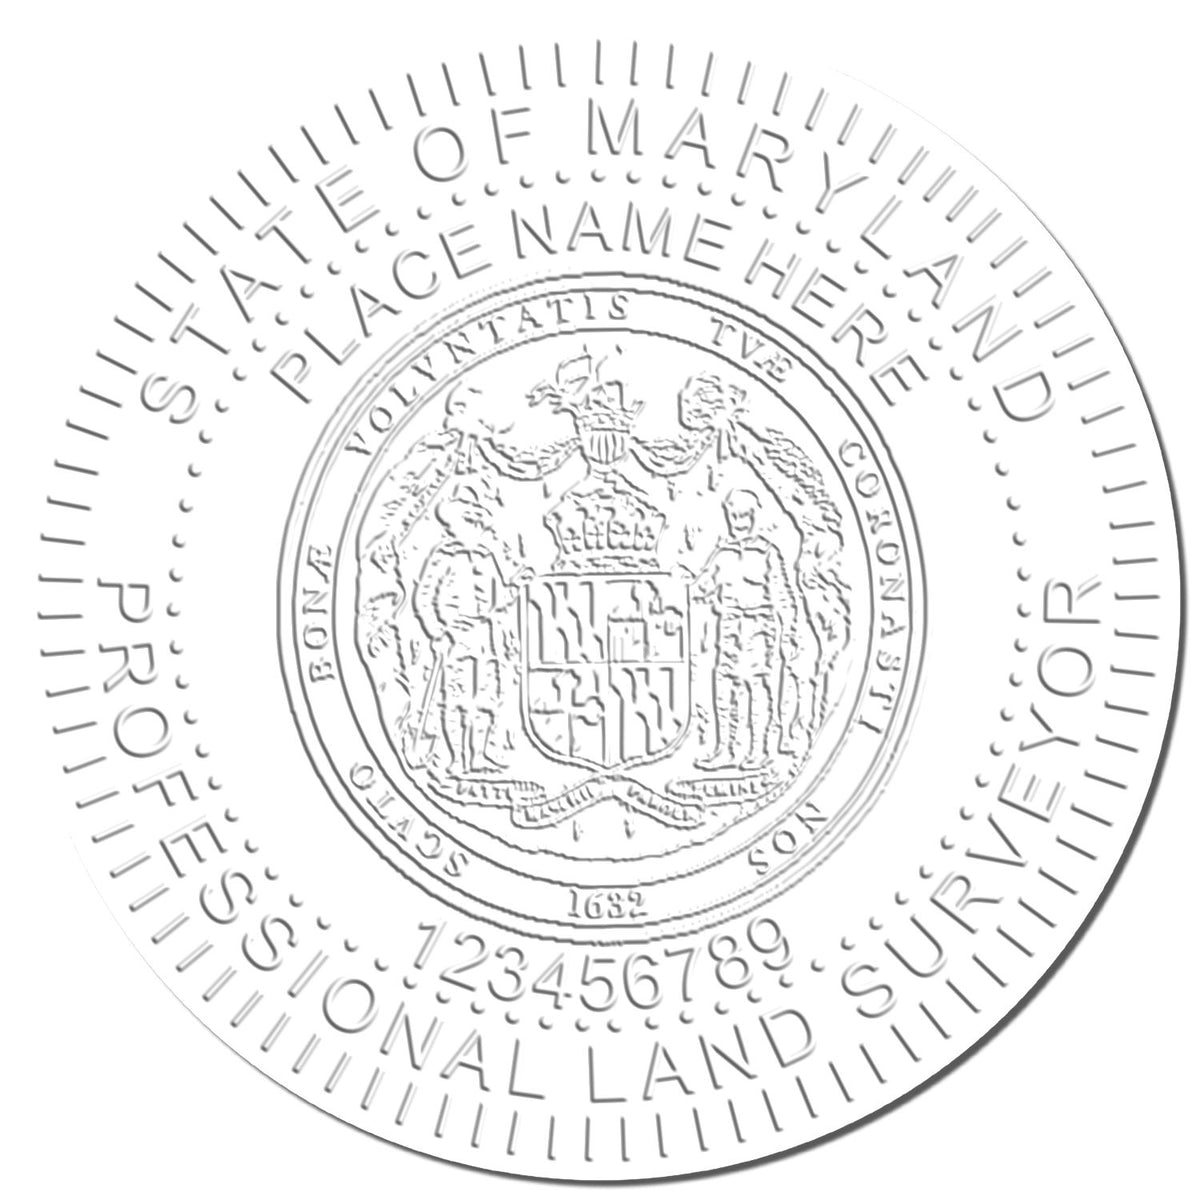 This paper is stamped with a sample imprint of the Gift Maryland Land Surveyor Seal, signifying its quality and reliability.